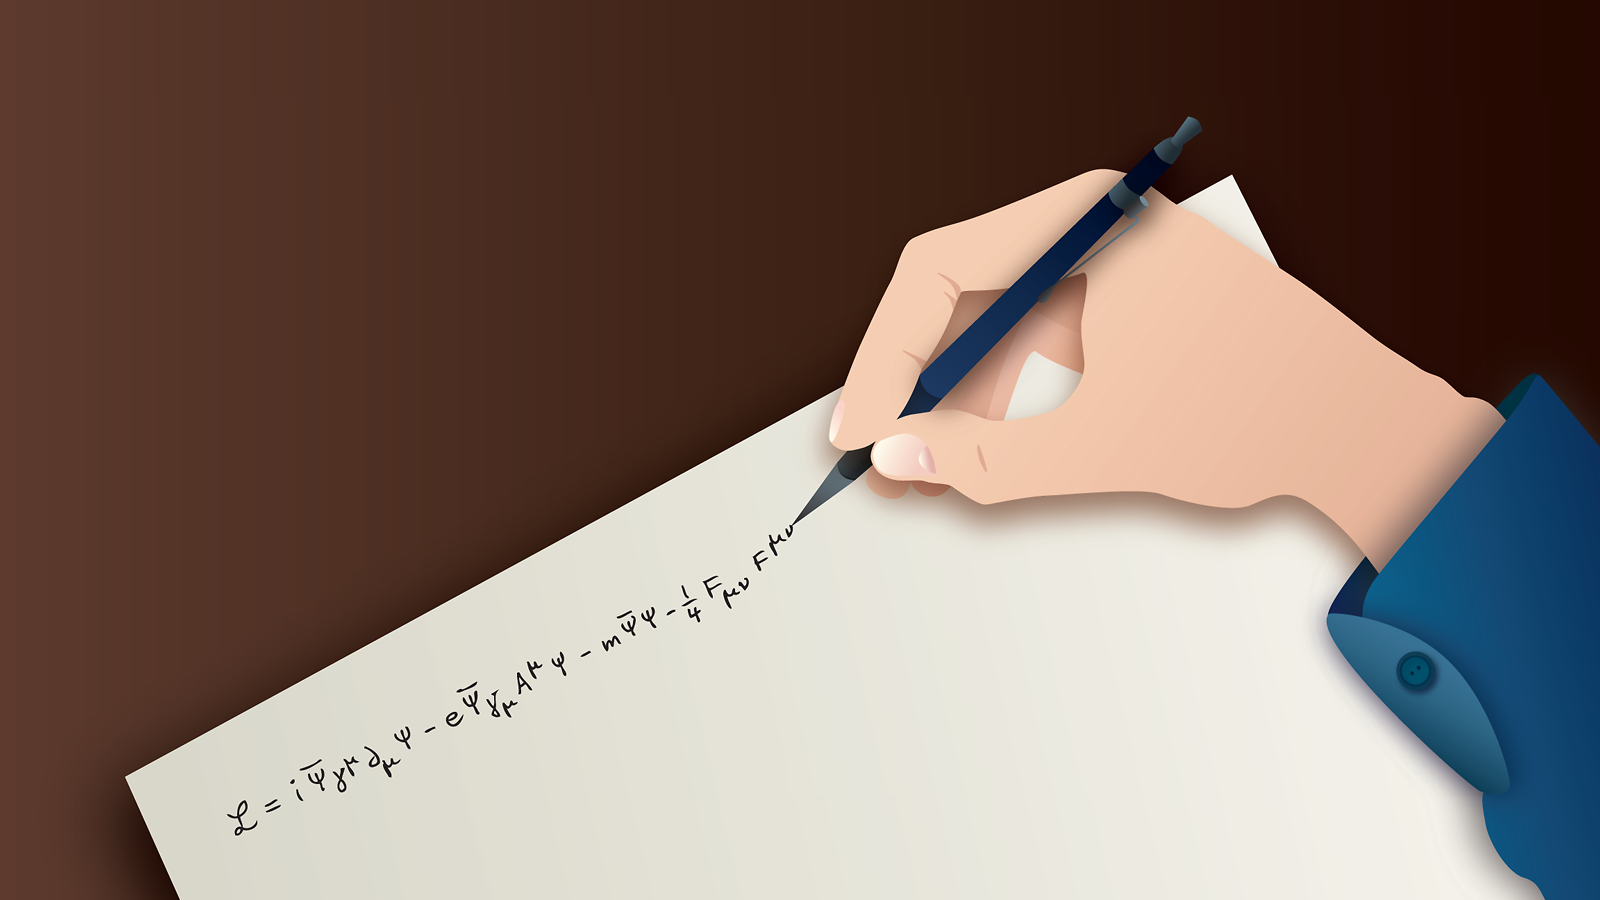 An illustration of a hand writing an equation